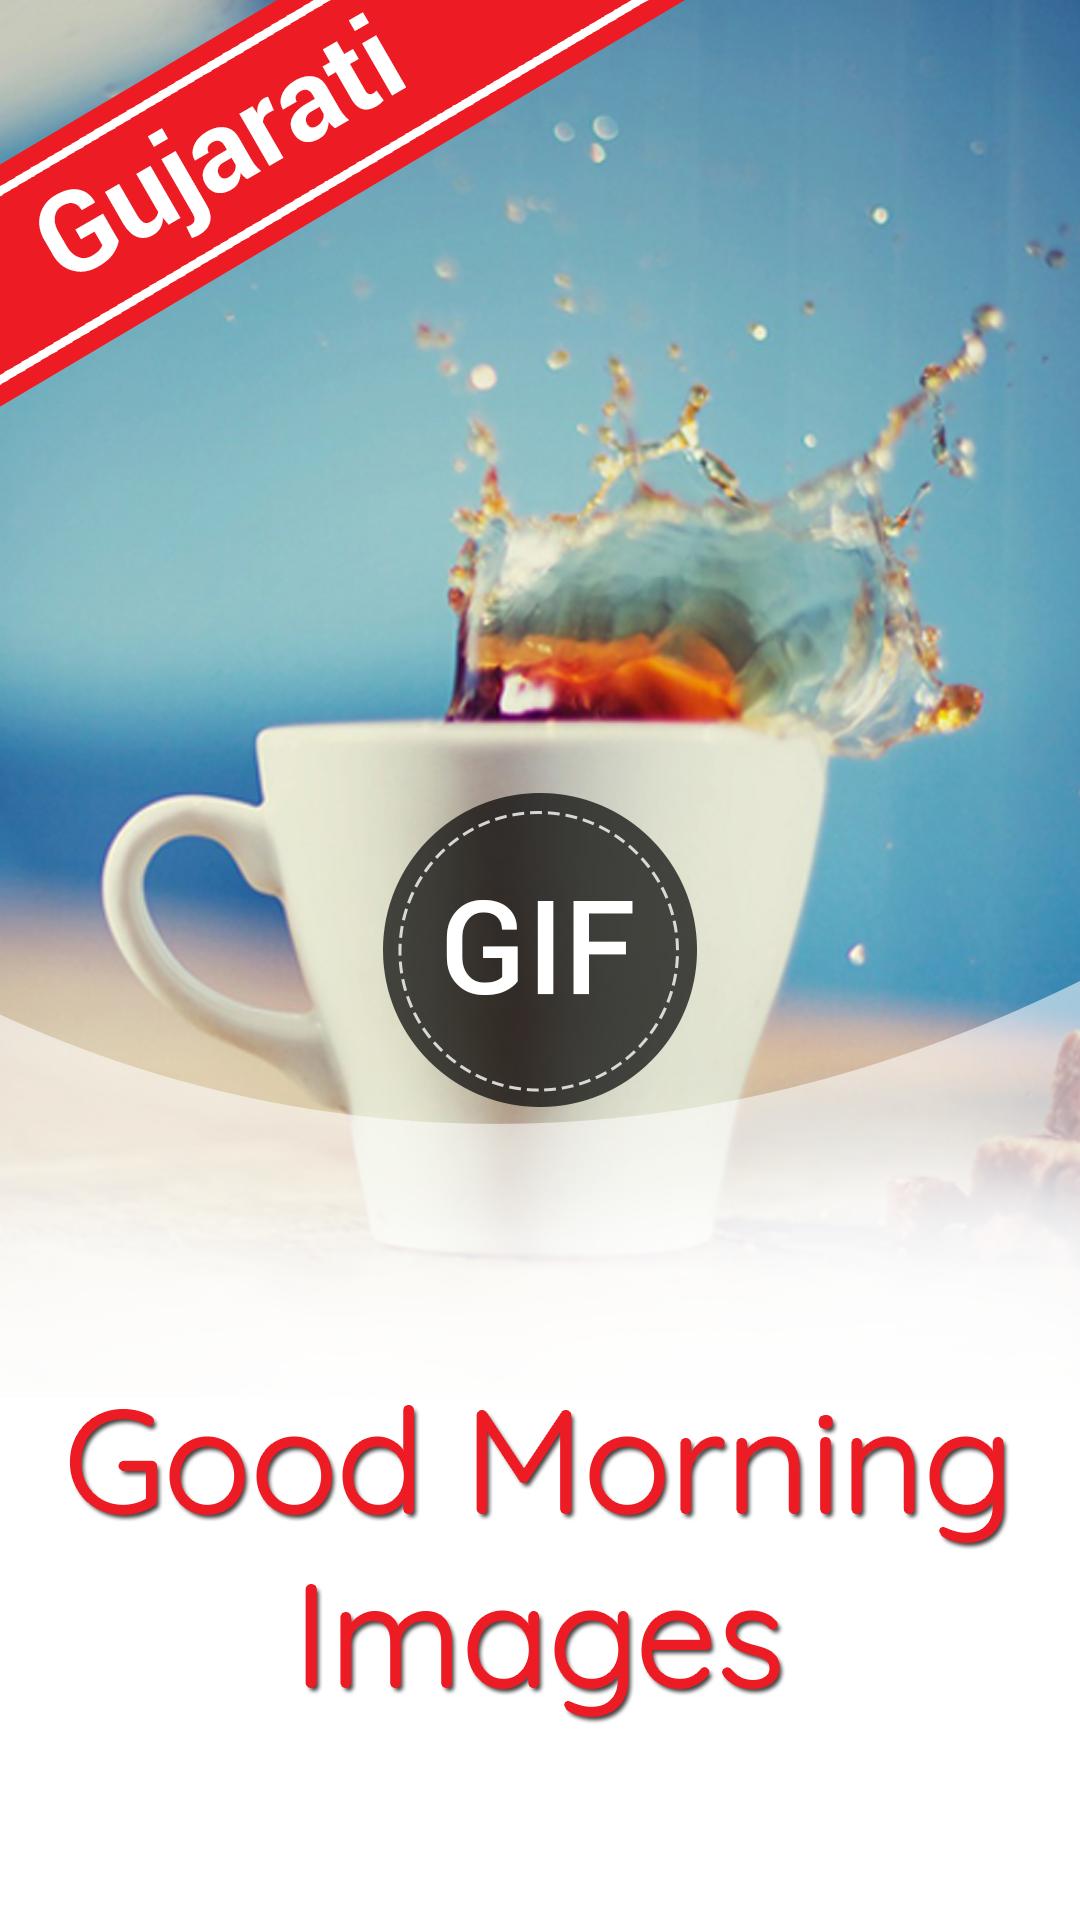 Good Morning Gif Images In Gujarati For Android Apk Download